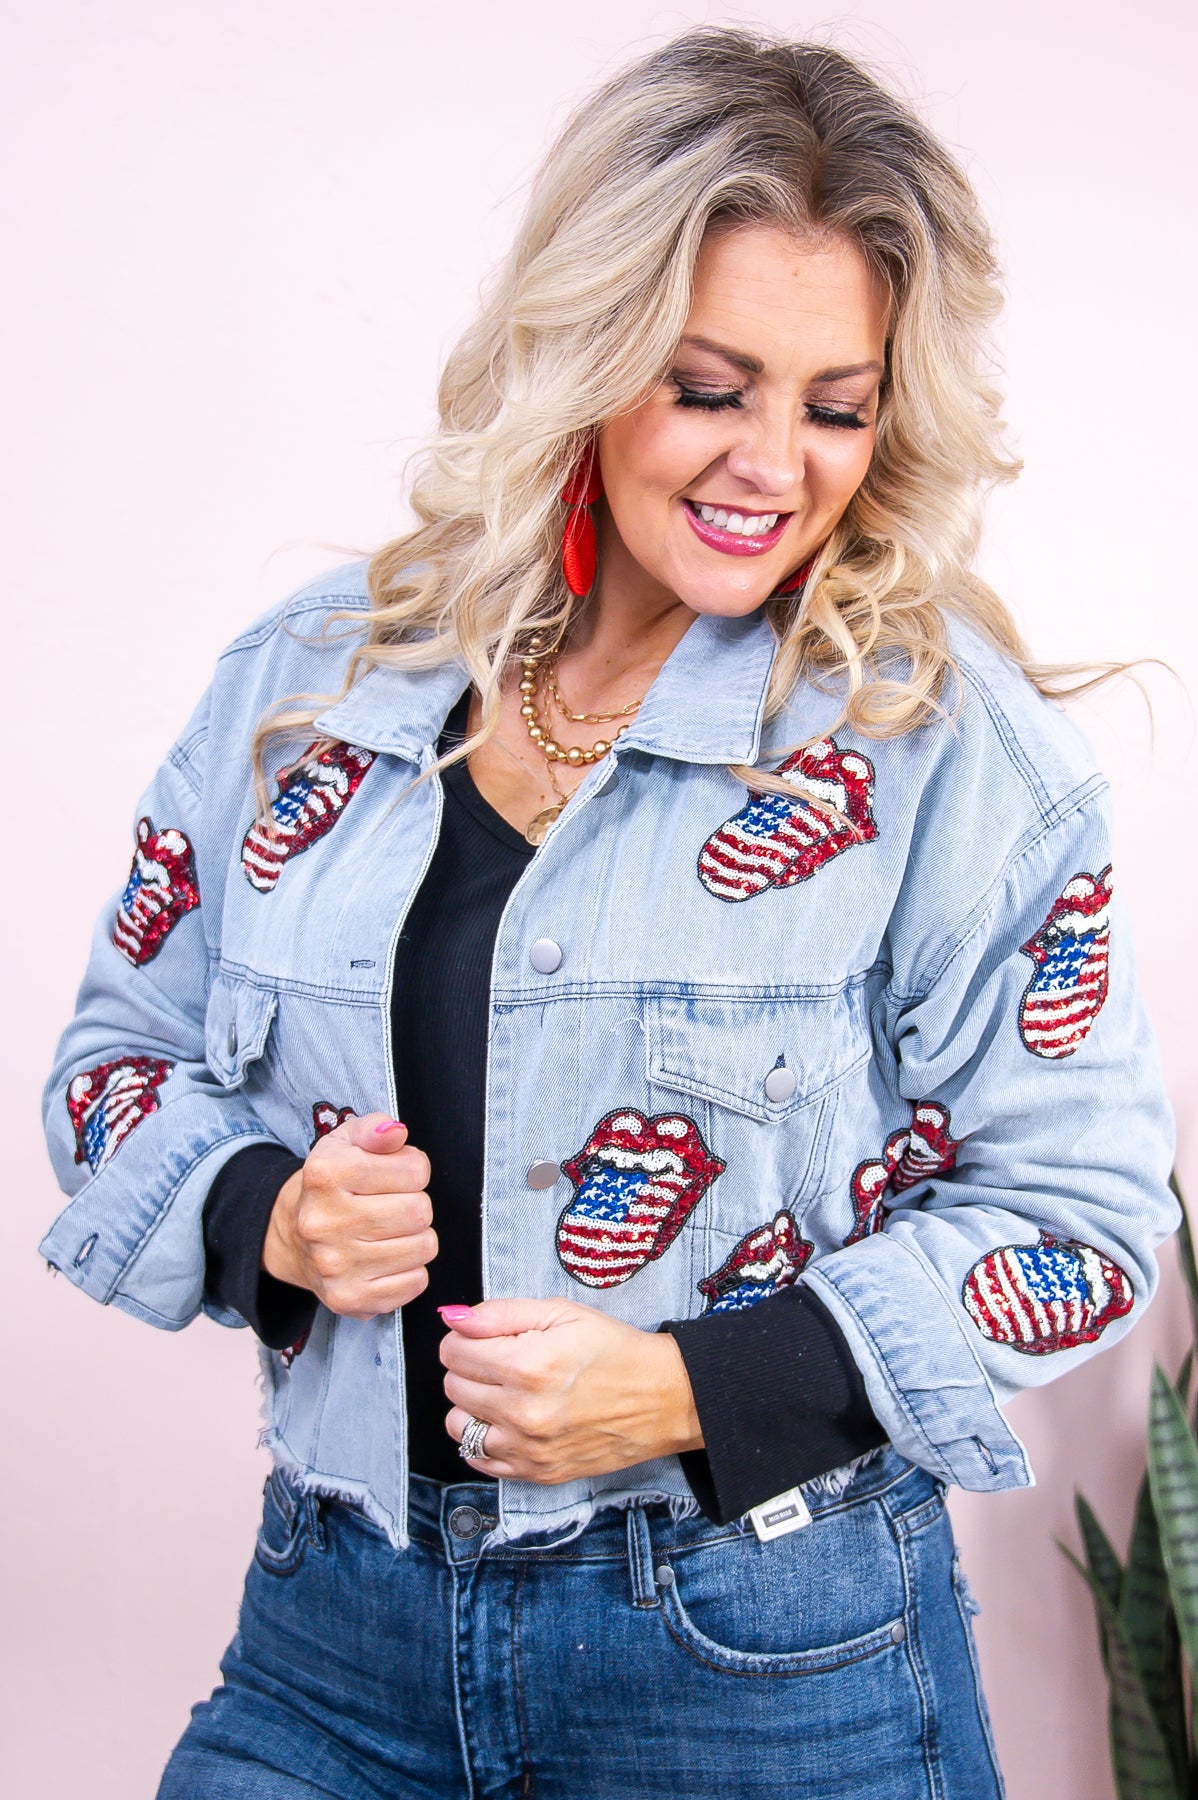 All American Diva Light Denim/Multi Color Sequin Mouth/Tongue Cropped Jacket - O5356LDN